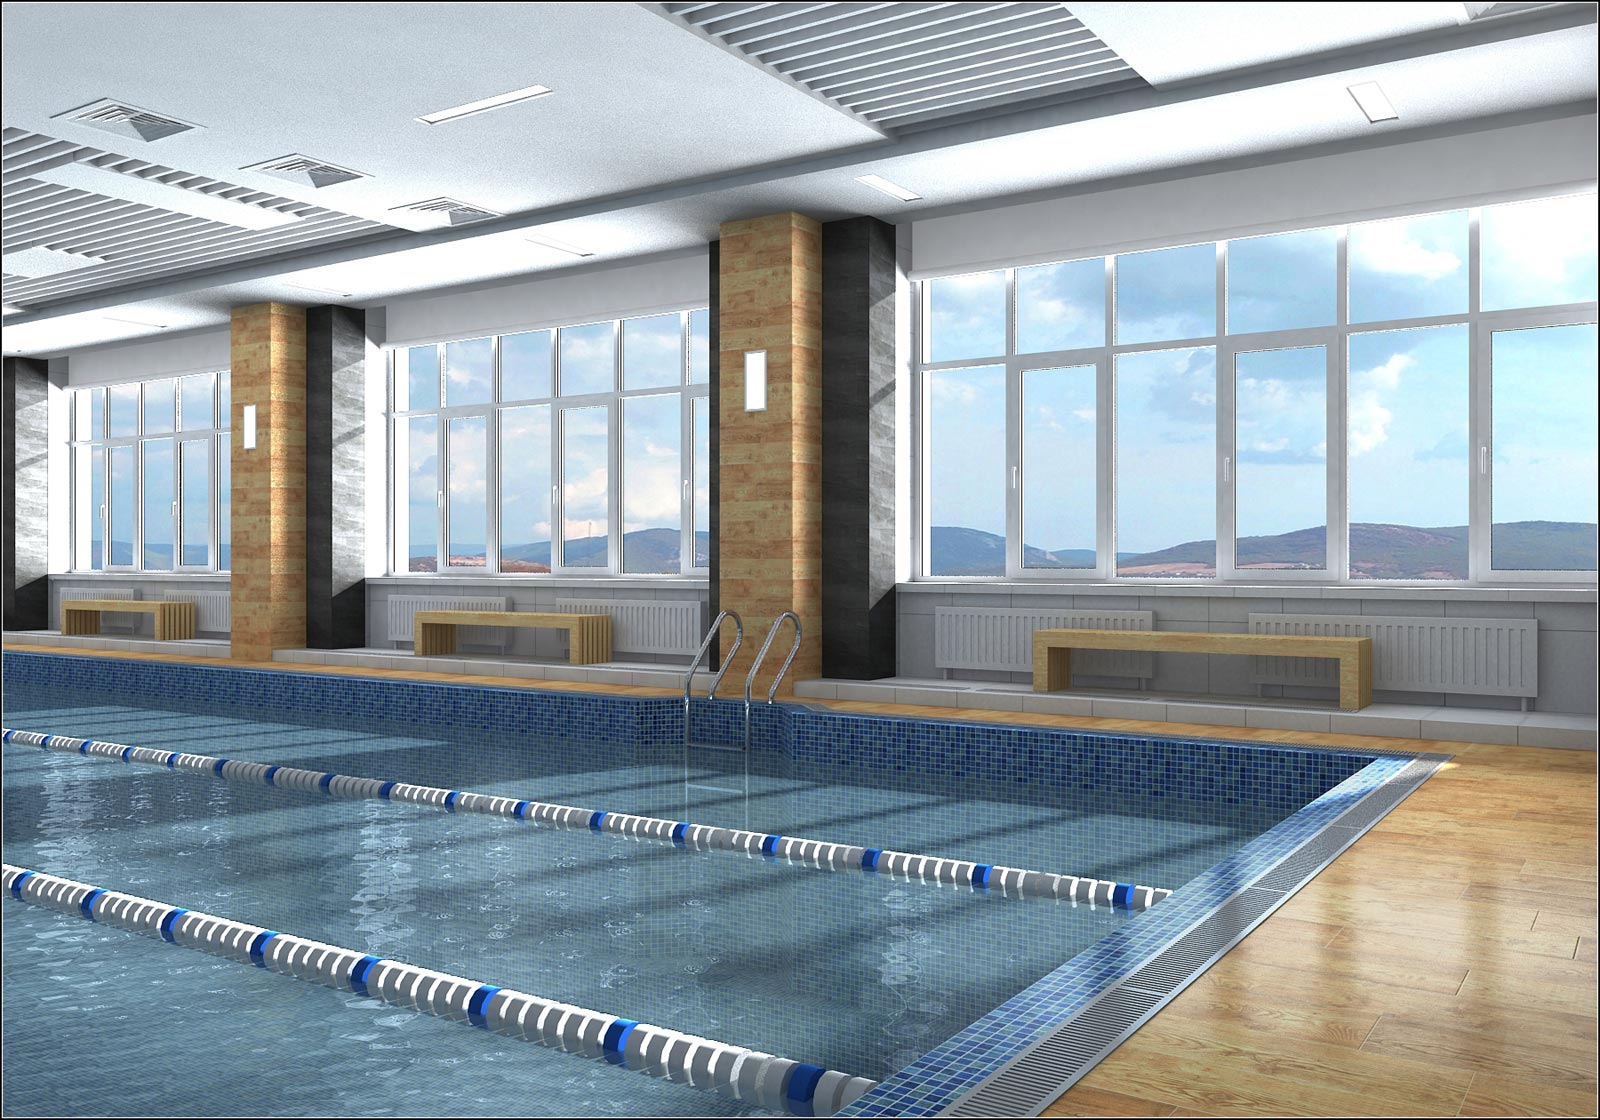 The project of interior design of the pool in Chernihiv in 3d max vray 1.5 image